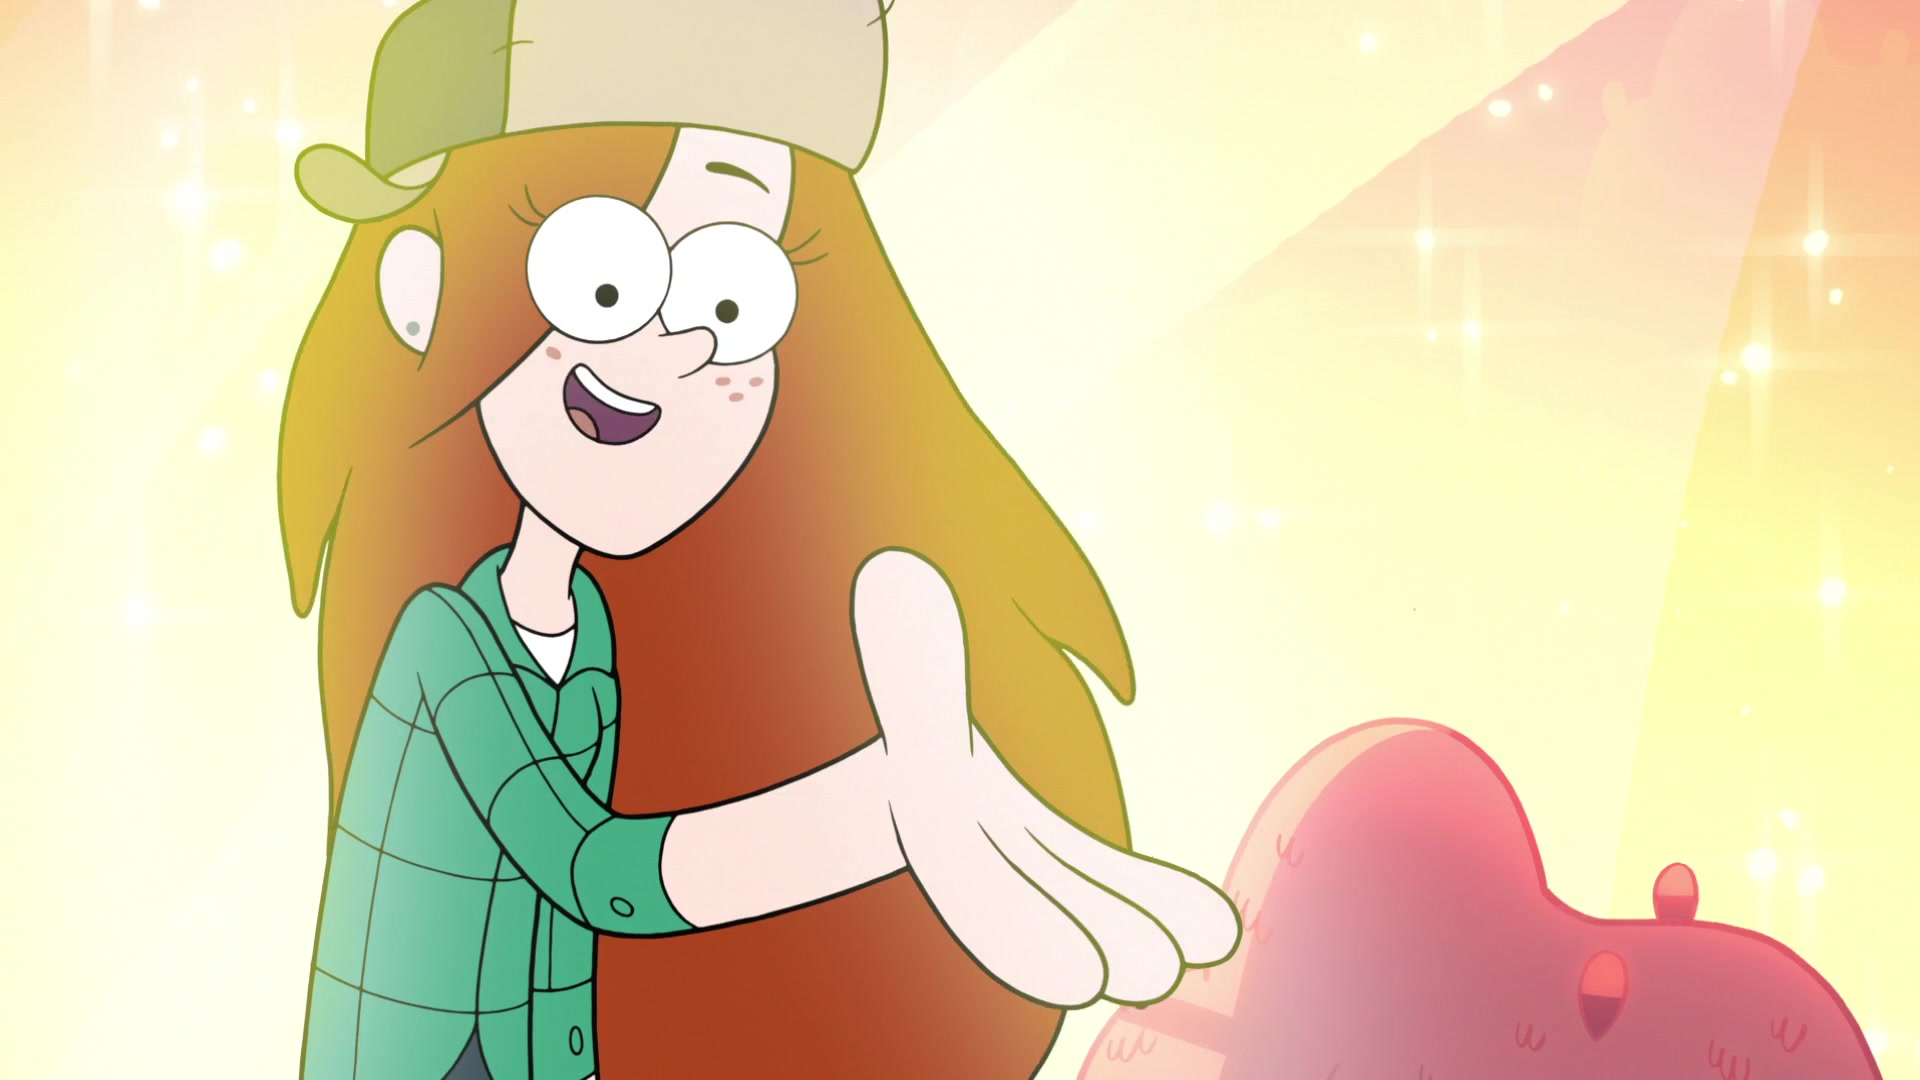 wendy middle finger gravity falls